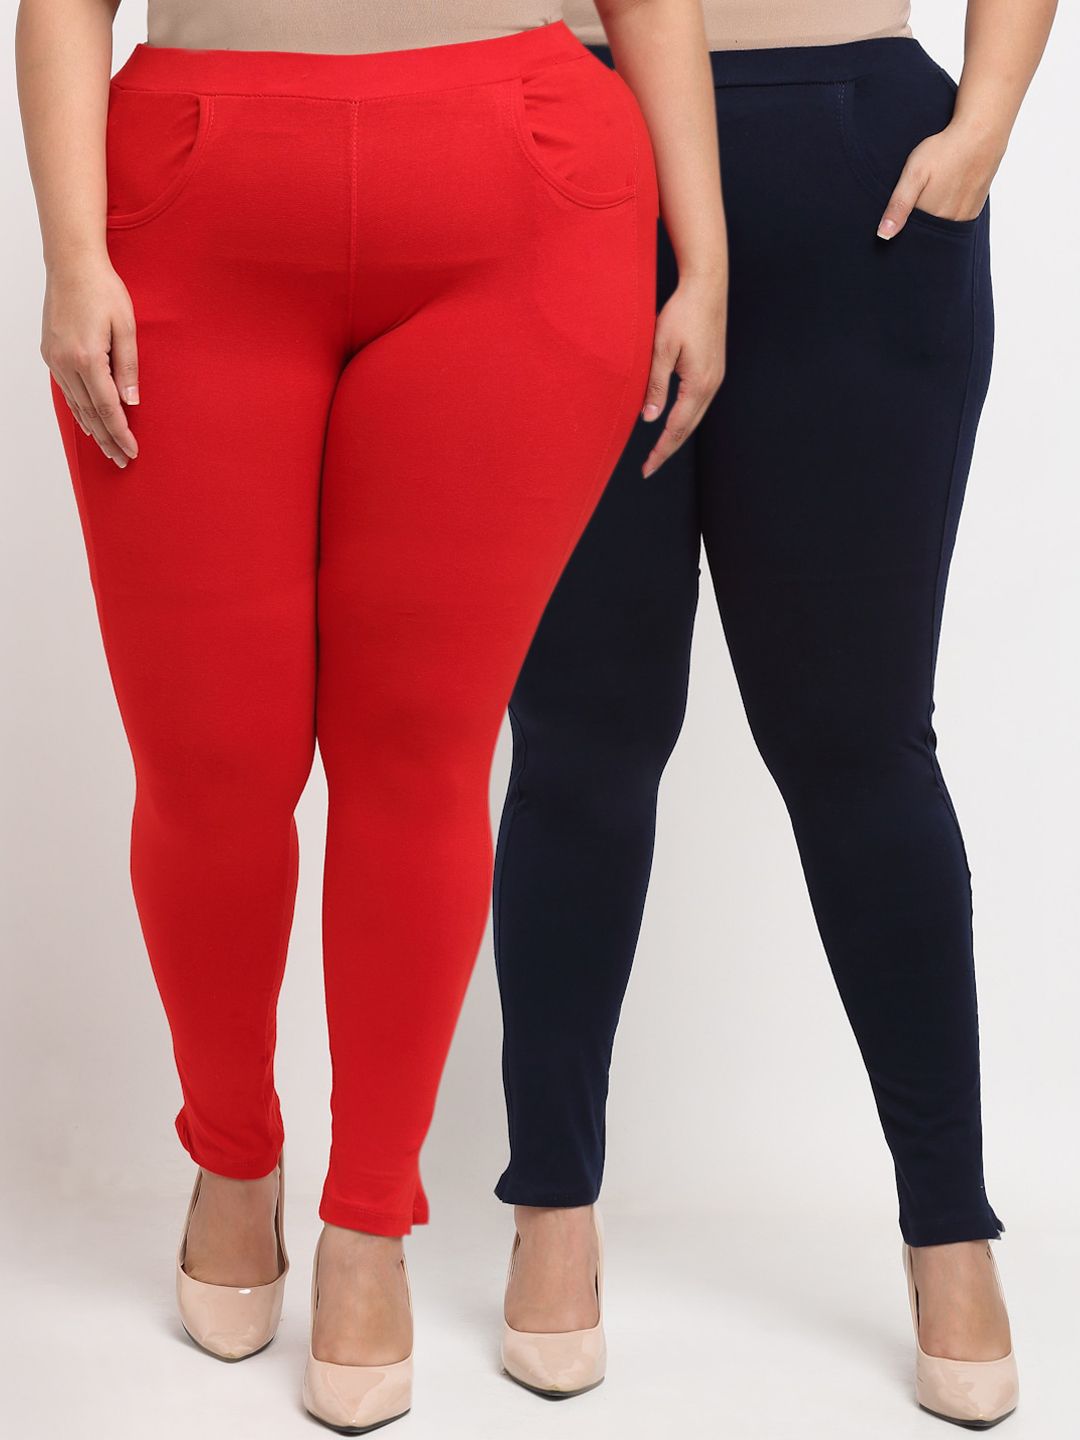 KLOTTHE Women Plus Size Pack of 2 Red & Navy Blue Solid Leggings Price in India